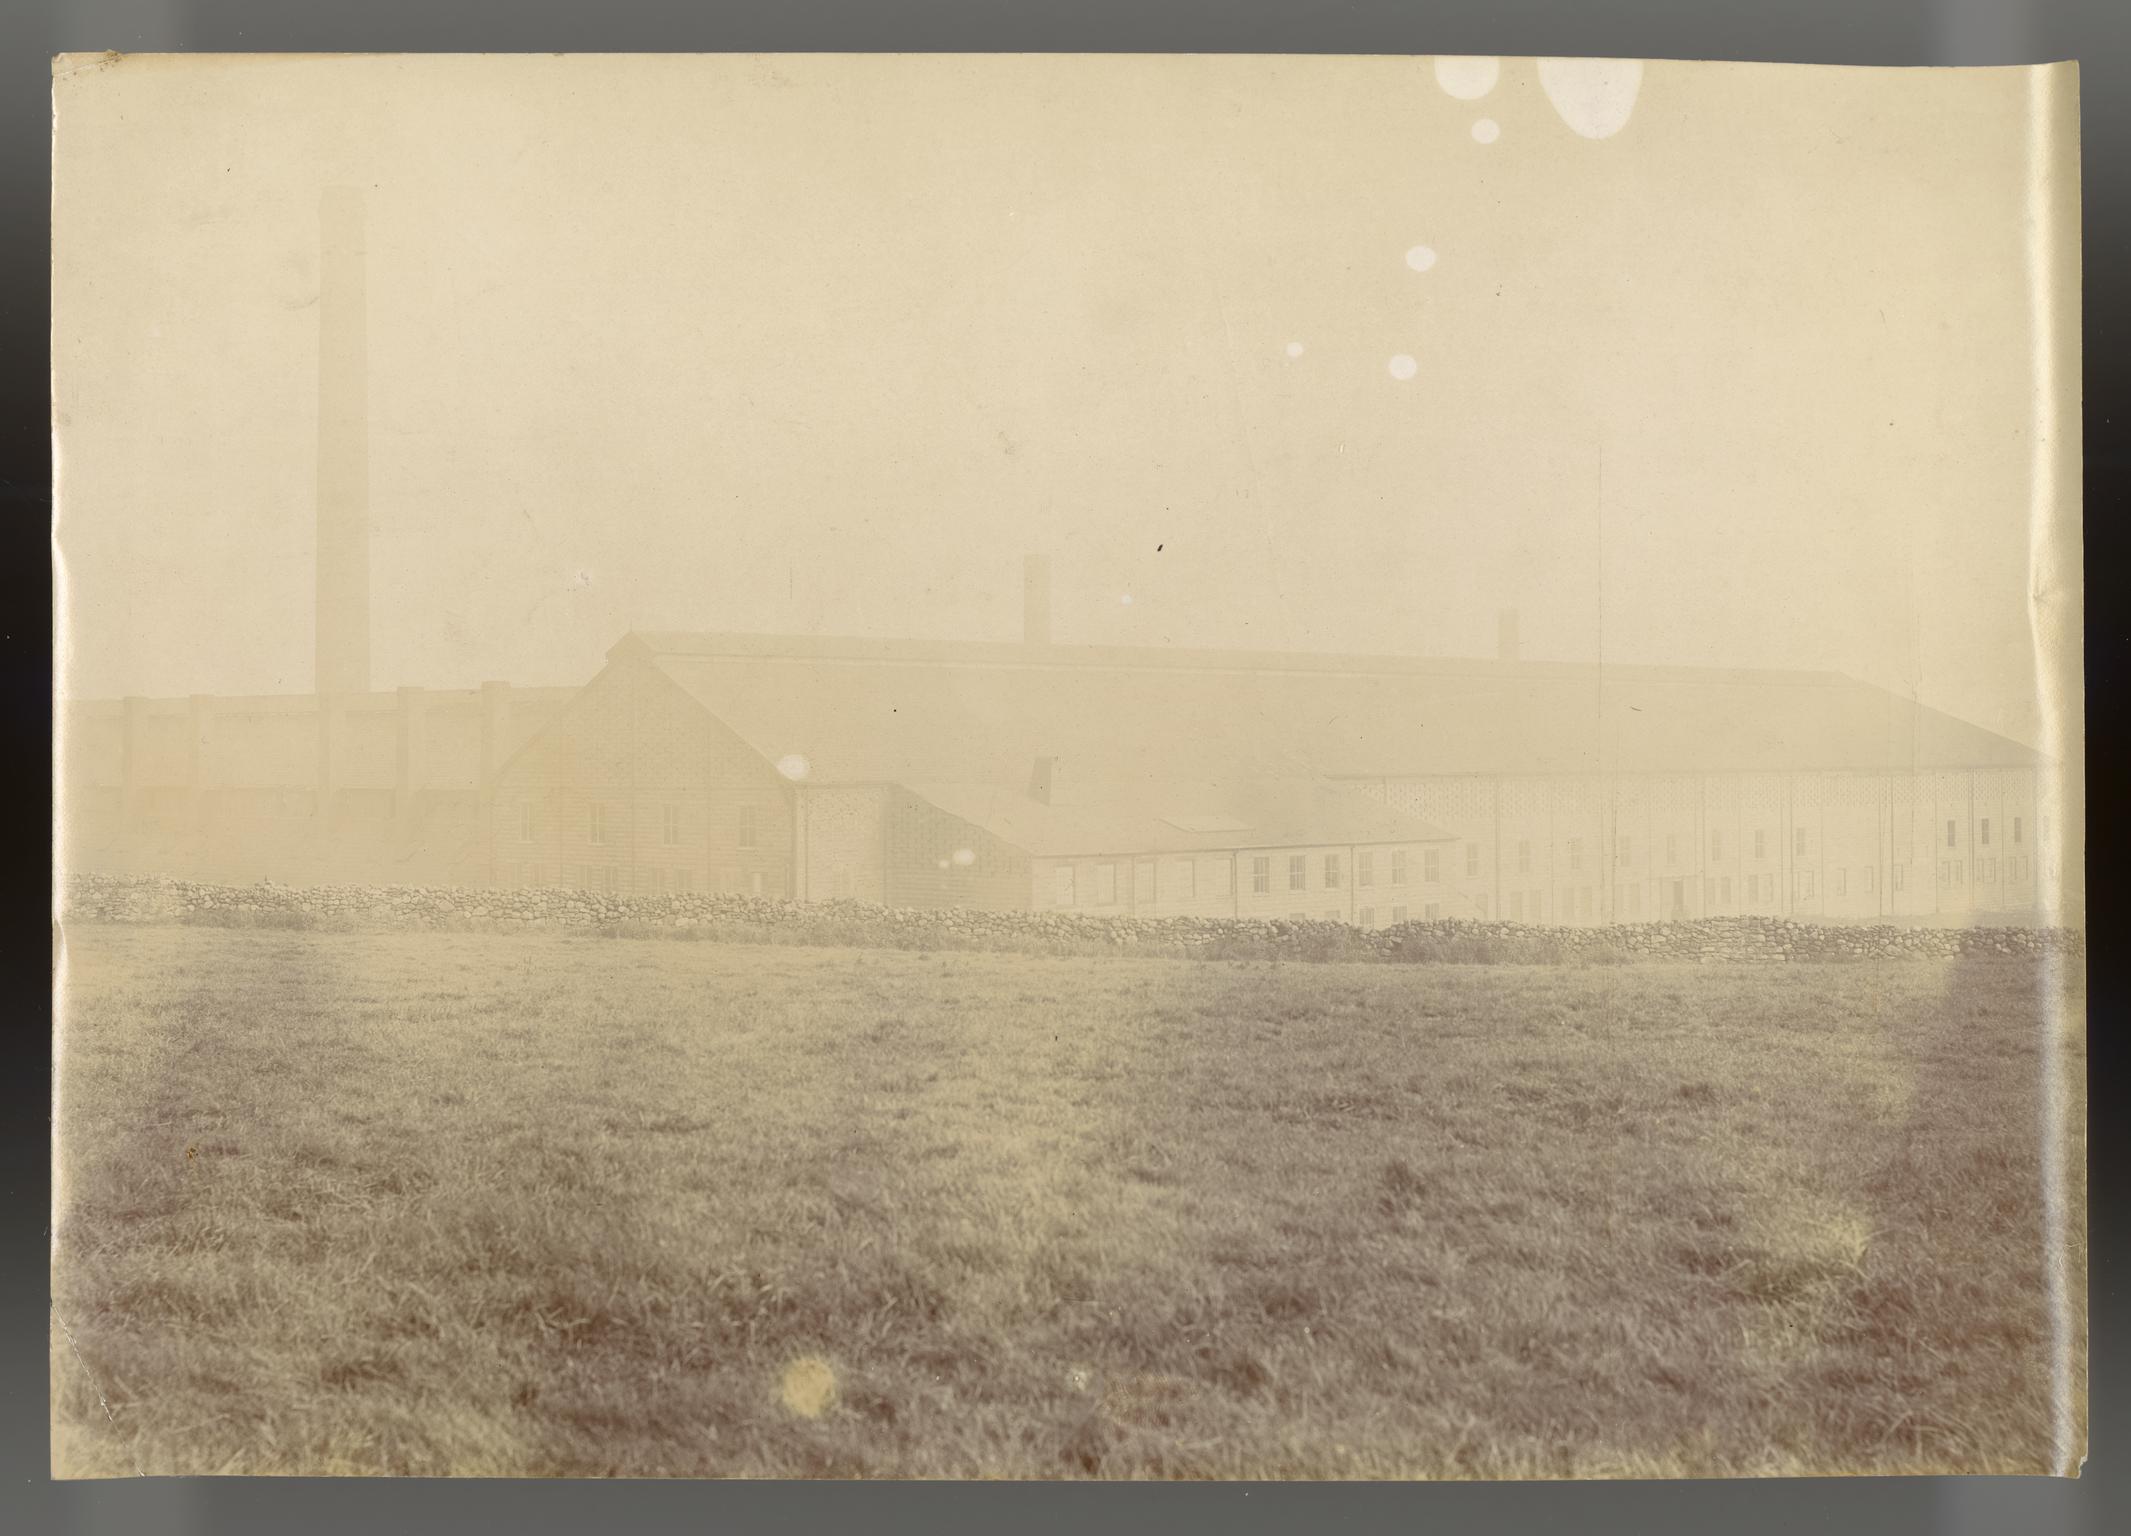 Shell making factory in Llanelli, photograph